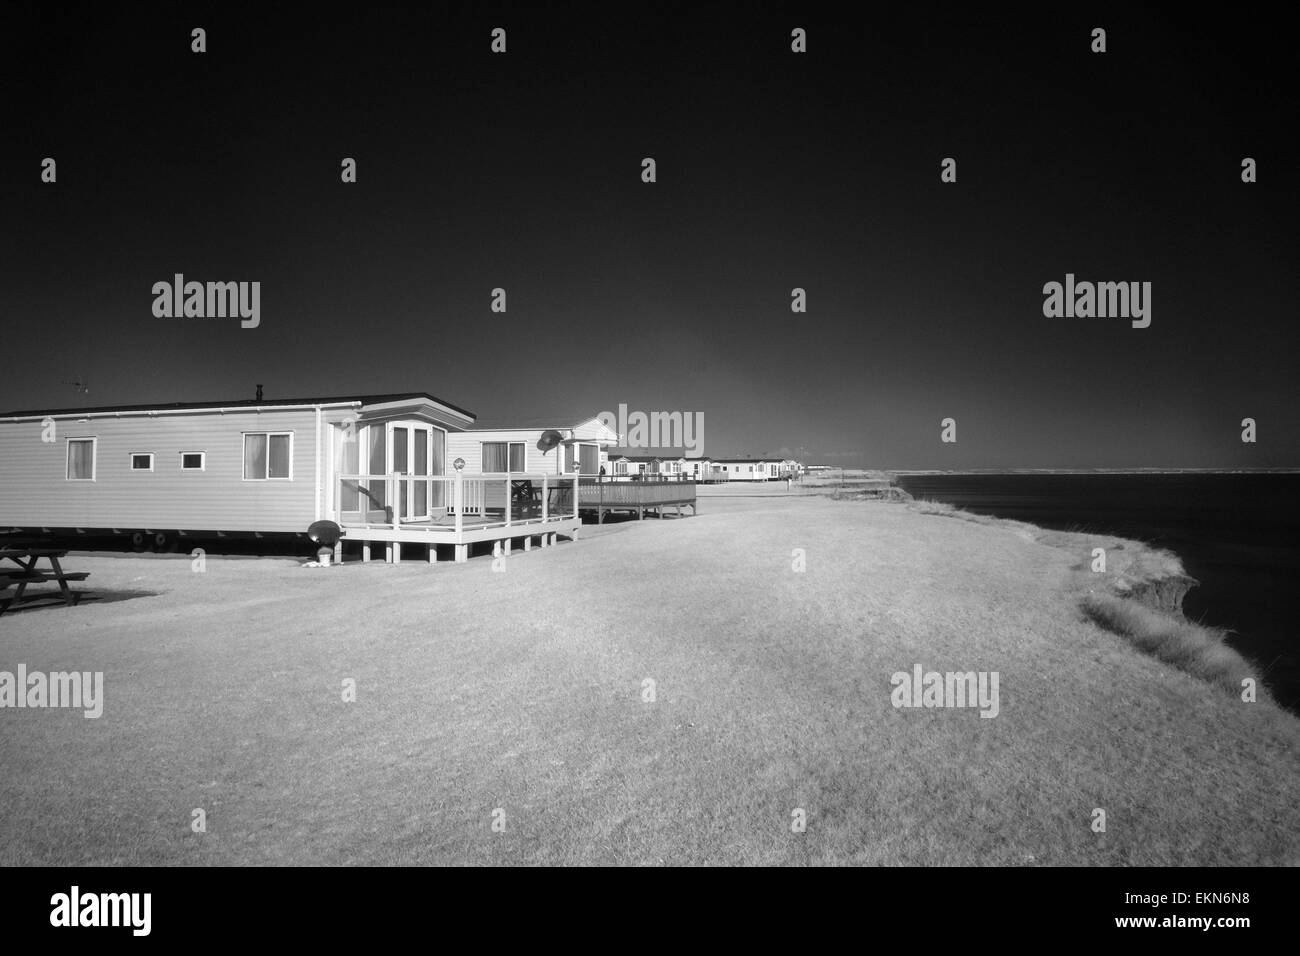 Infra red mono images of holiday caravan site. Stock Photo